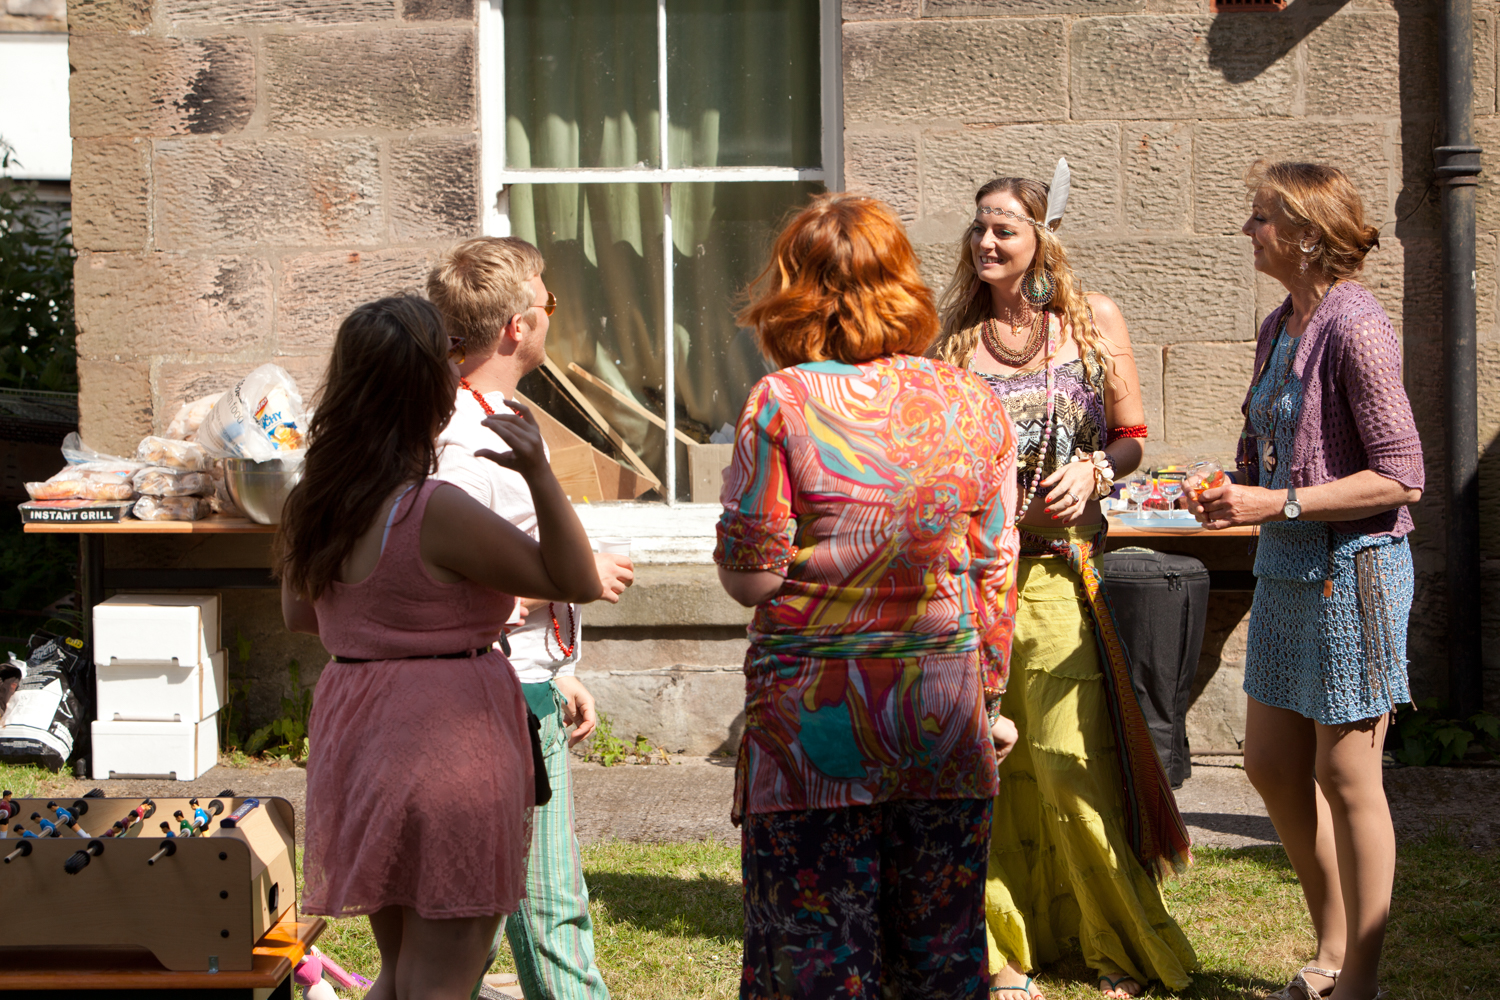 PICTORIAL_BERWICK_60th-festival-love-peace-party-bbq-gathering-celebration-reportage-coverage-photography-8656.jpg